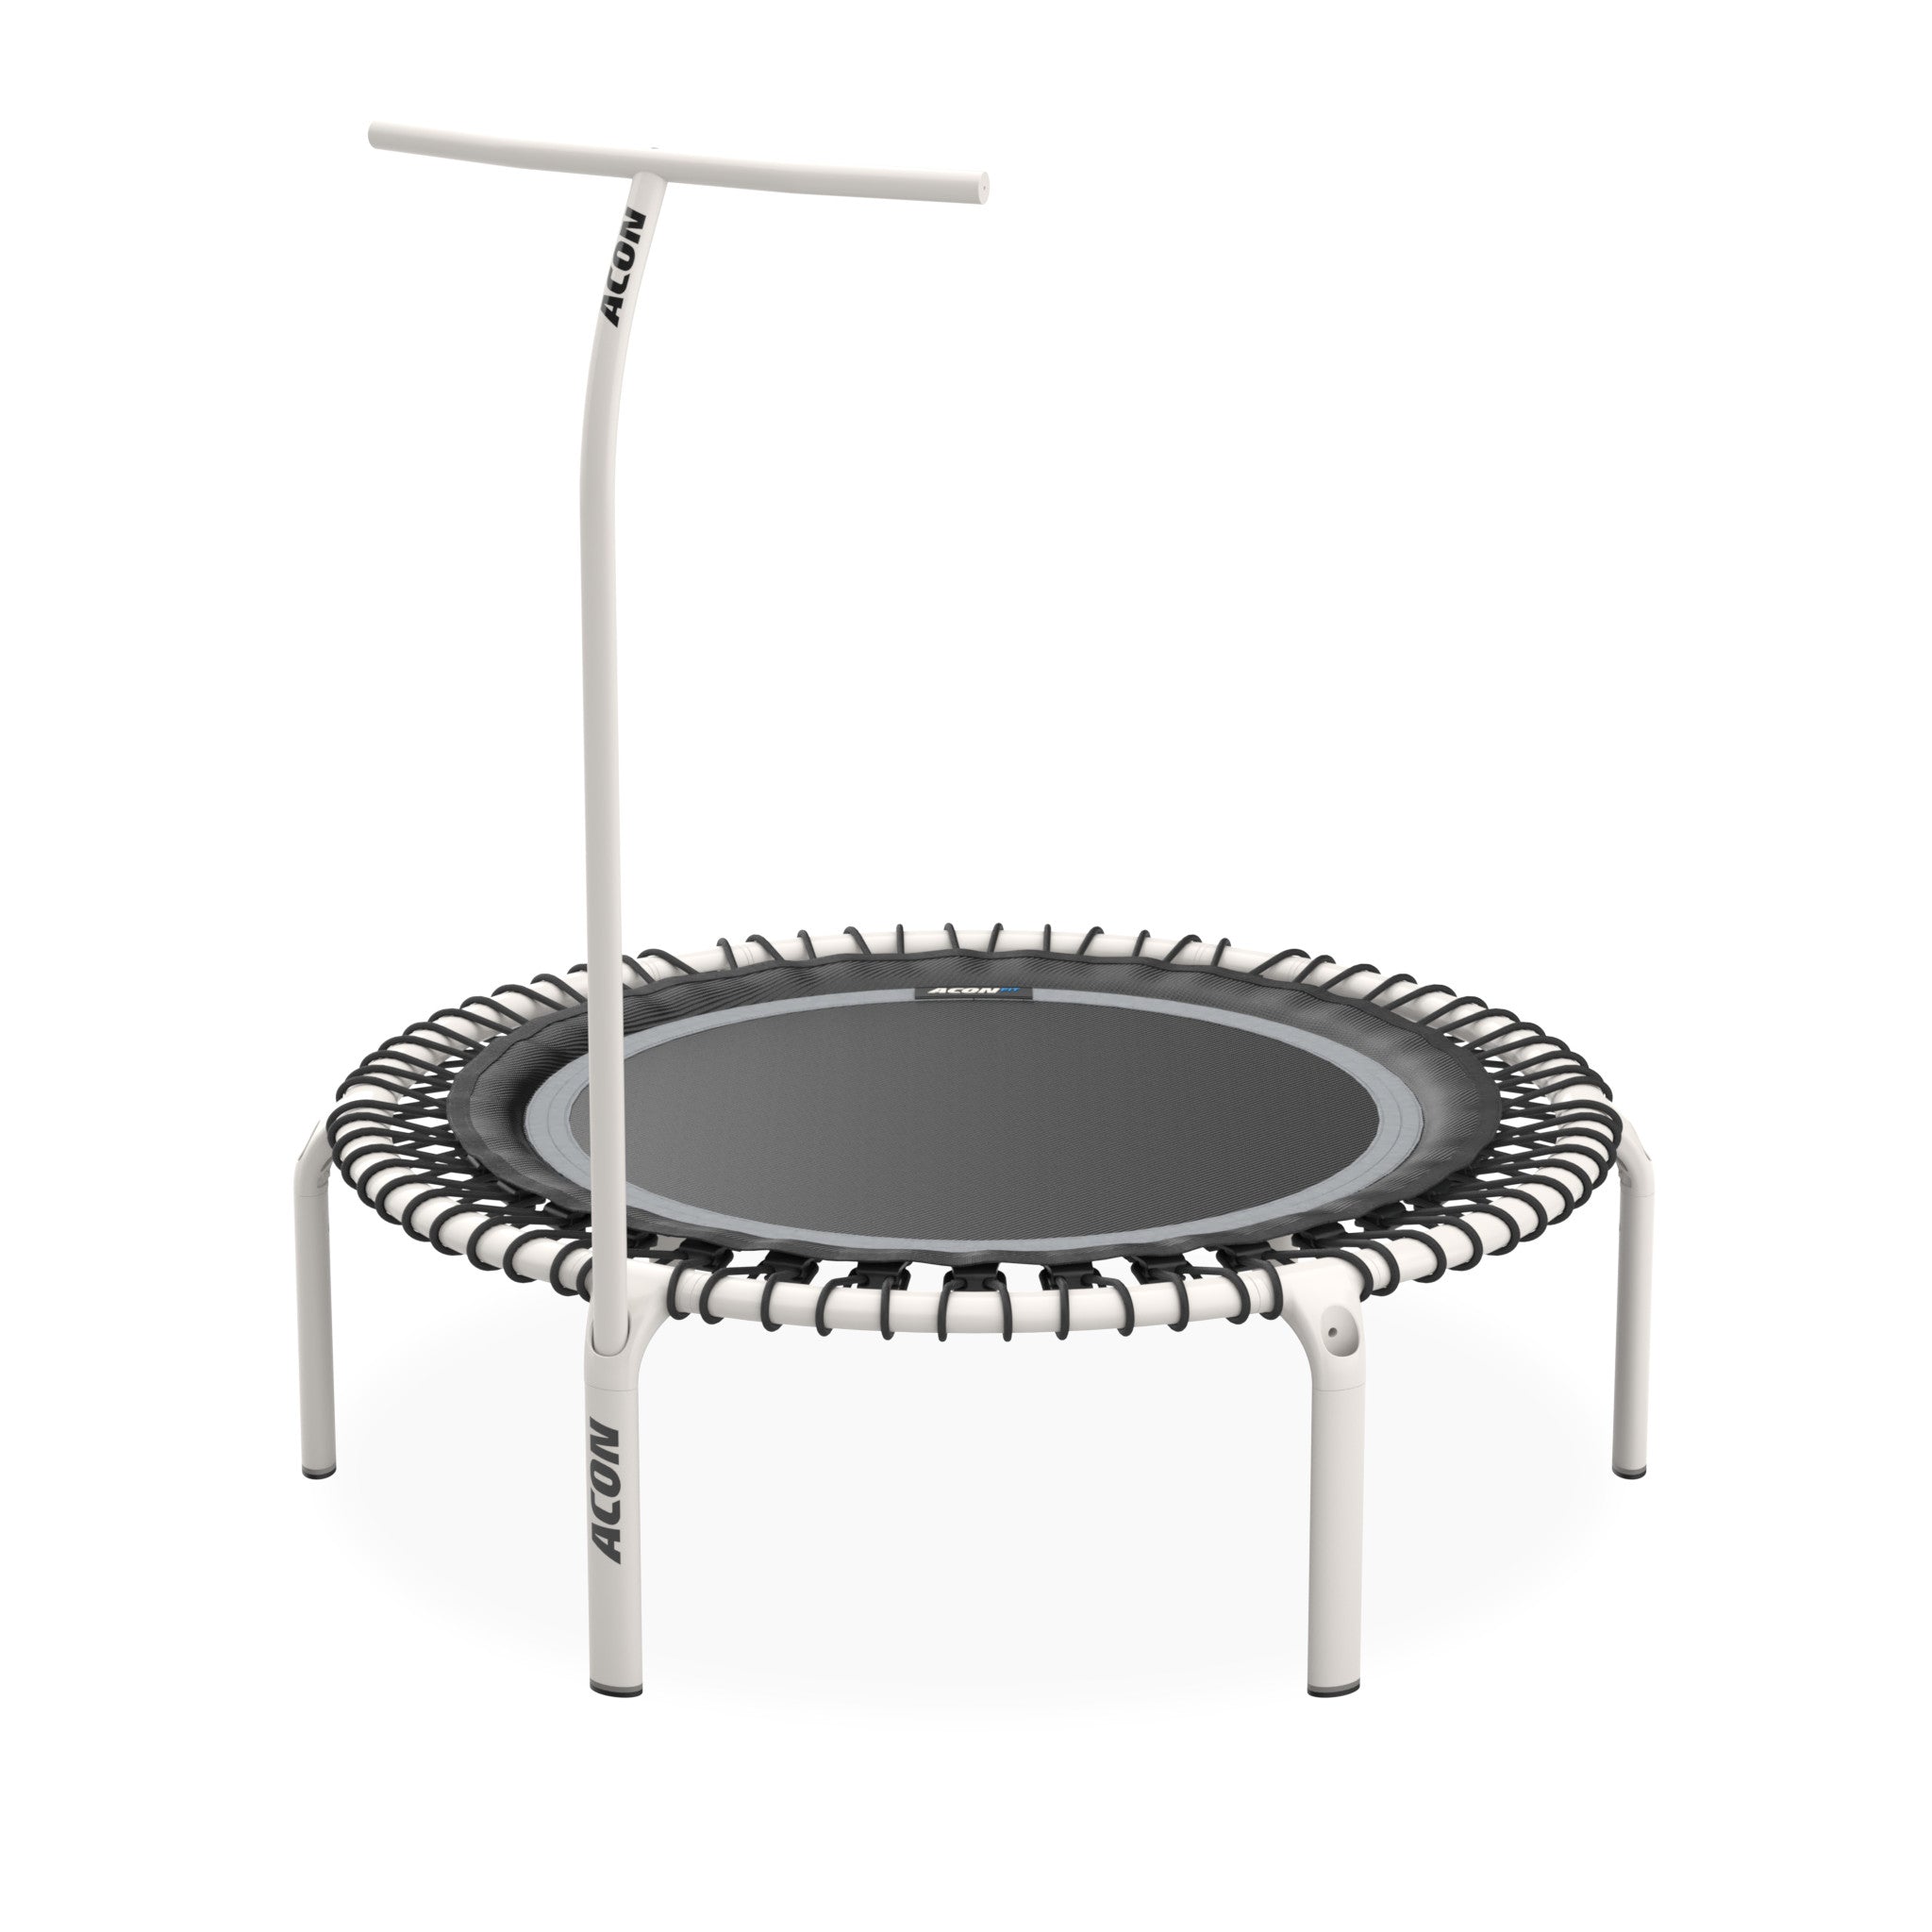 gras bibliothecaris soort ACON FIT 44in Trampoline Round | Enhance your performancce – ACON USA